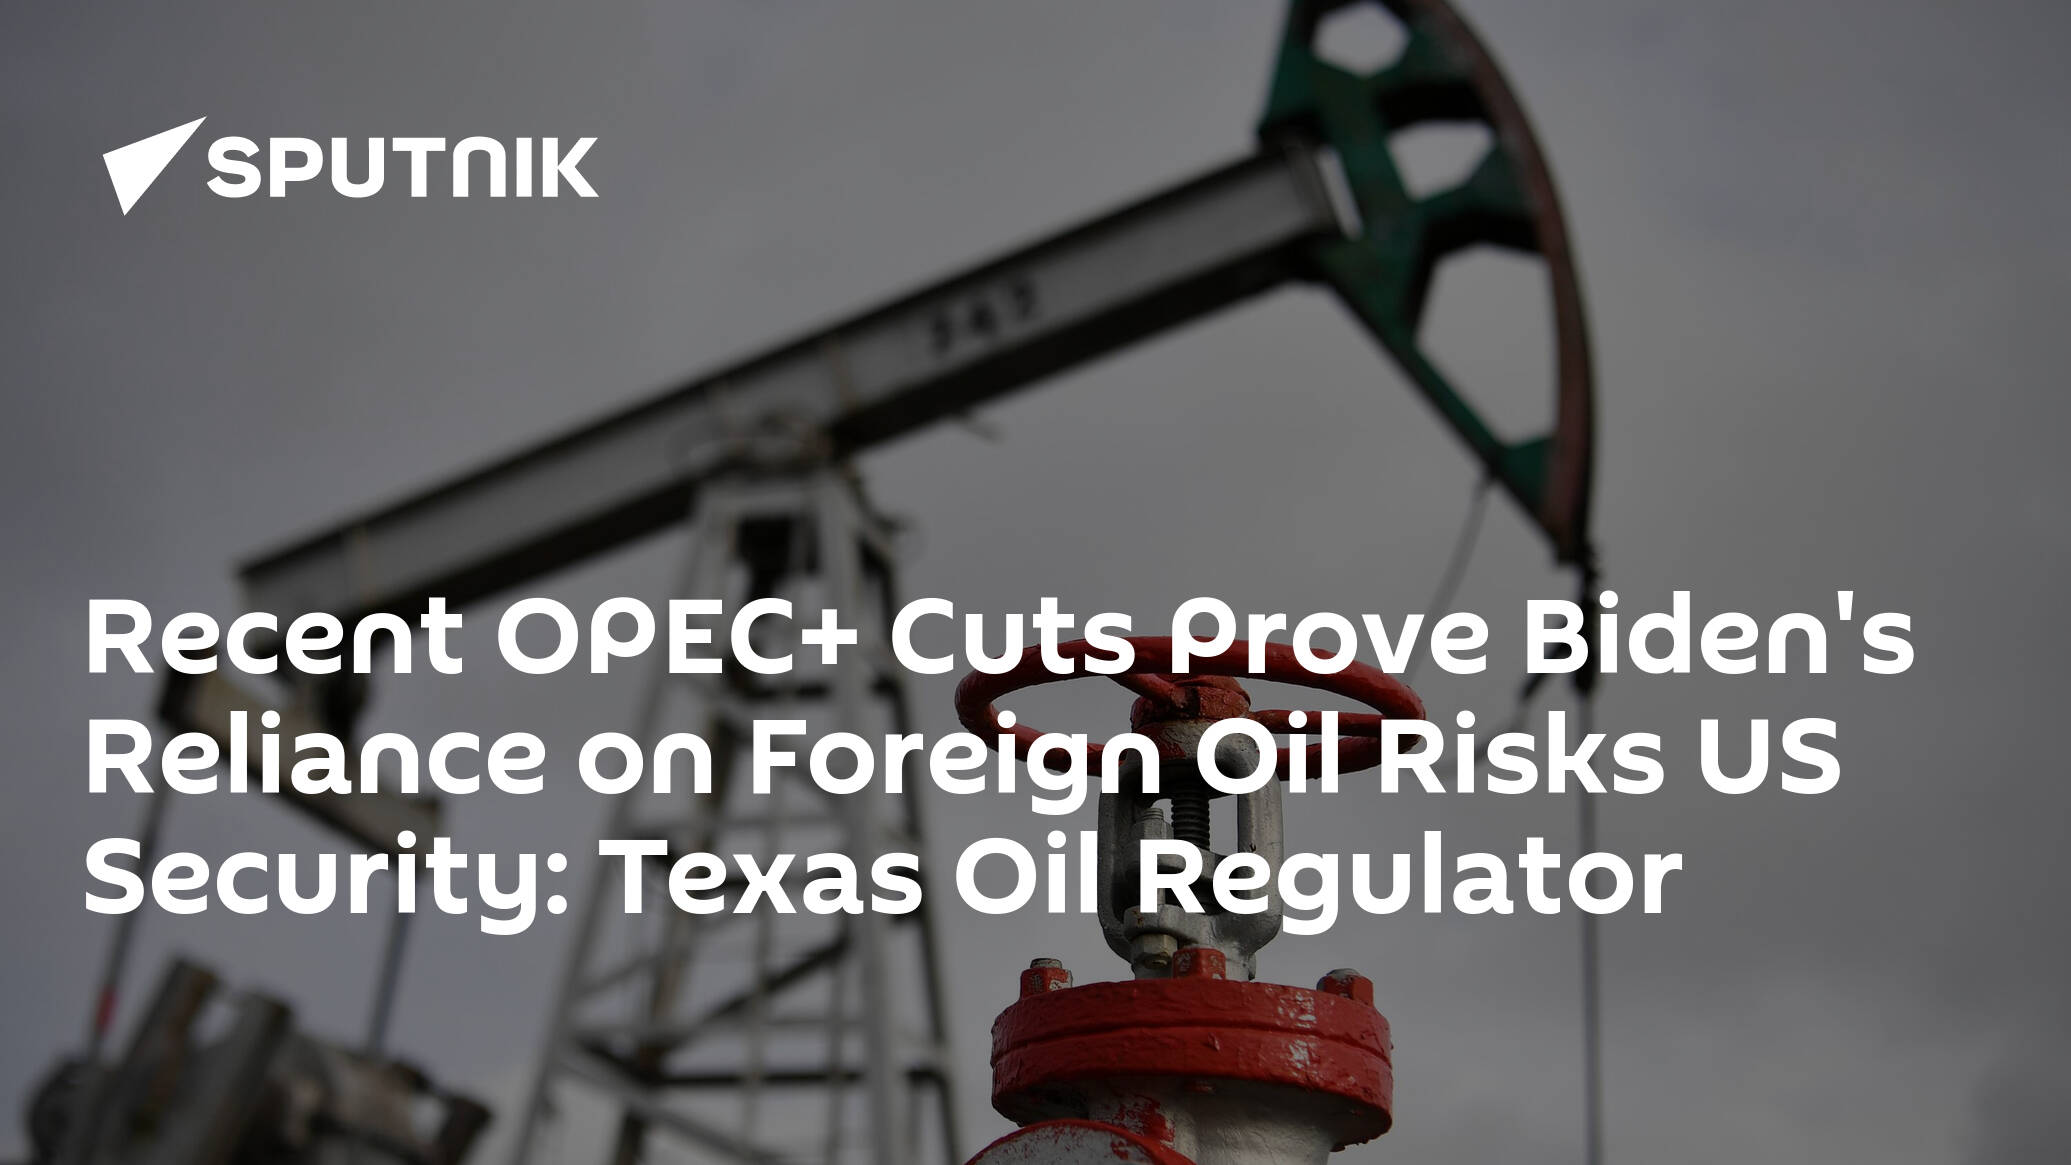 Recent OPEC+ Cuts Prove Biden's Reliance on Foreign Oil Risks US Security